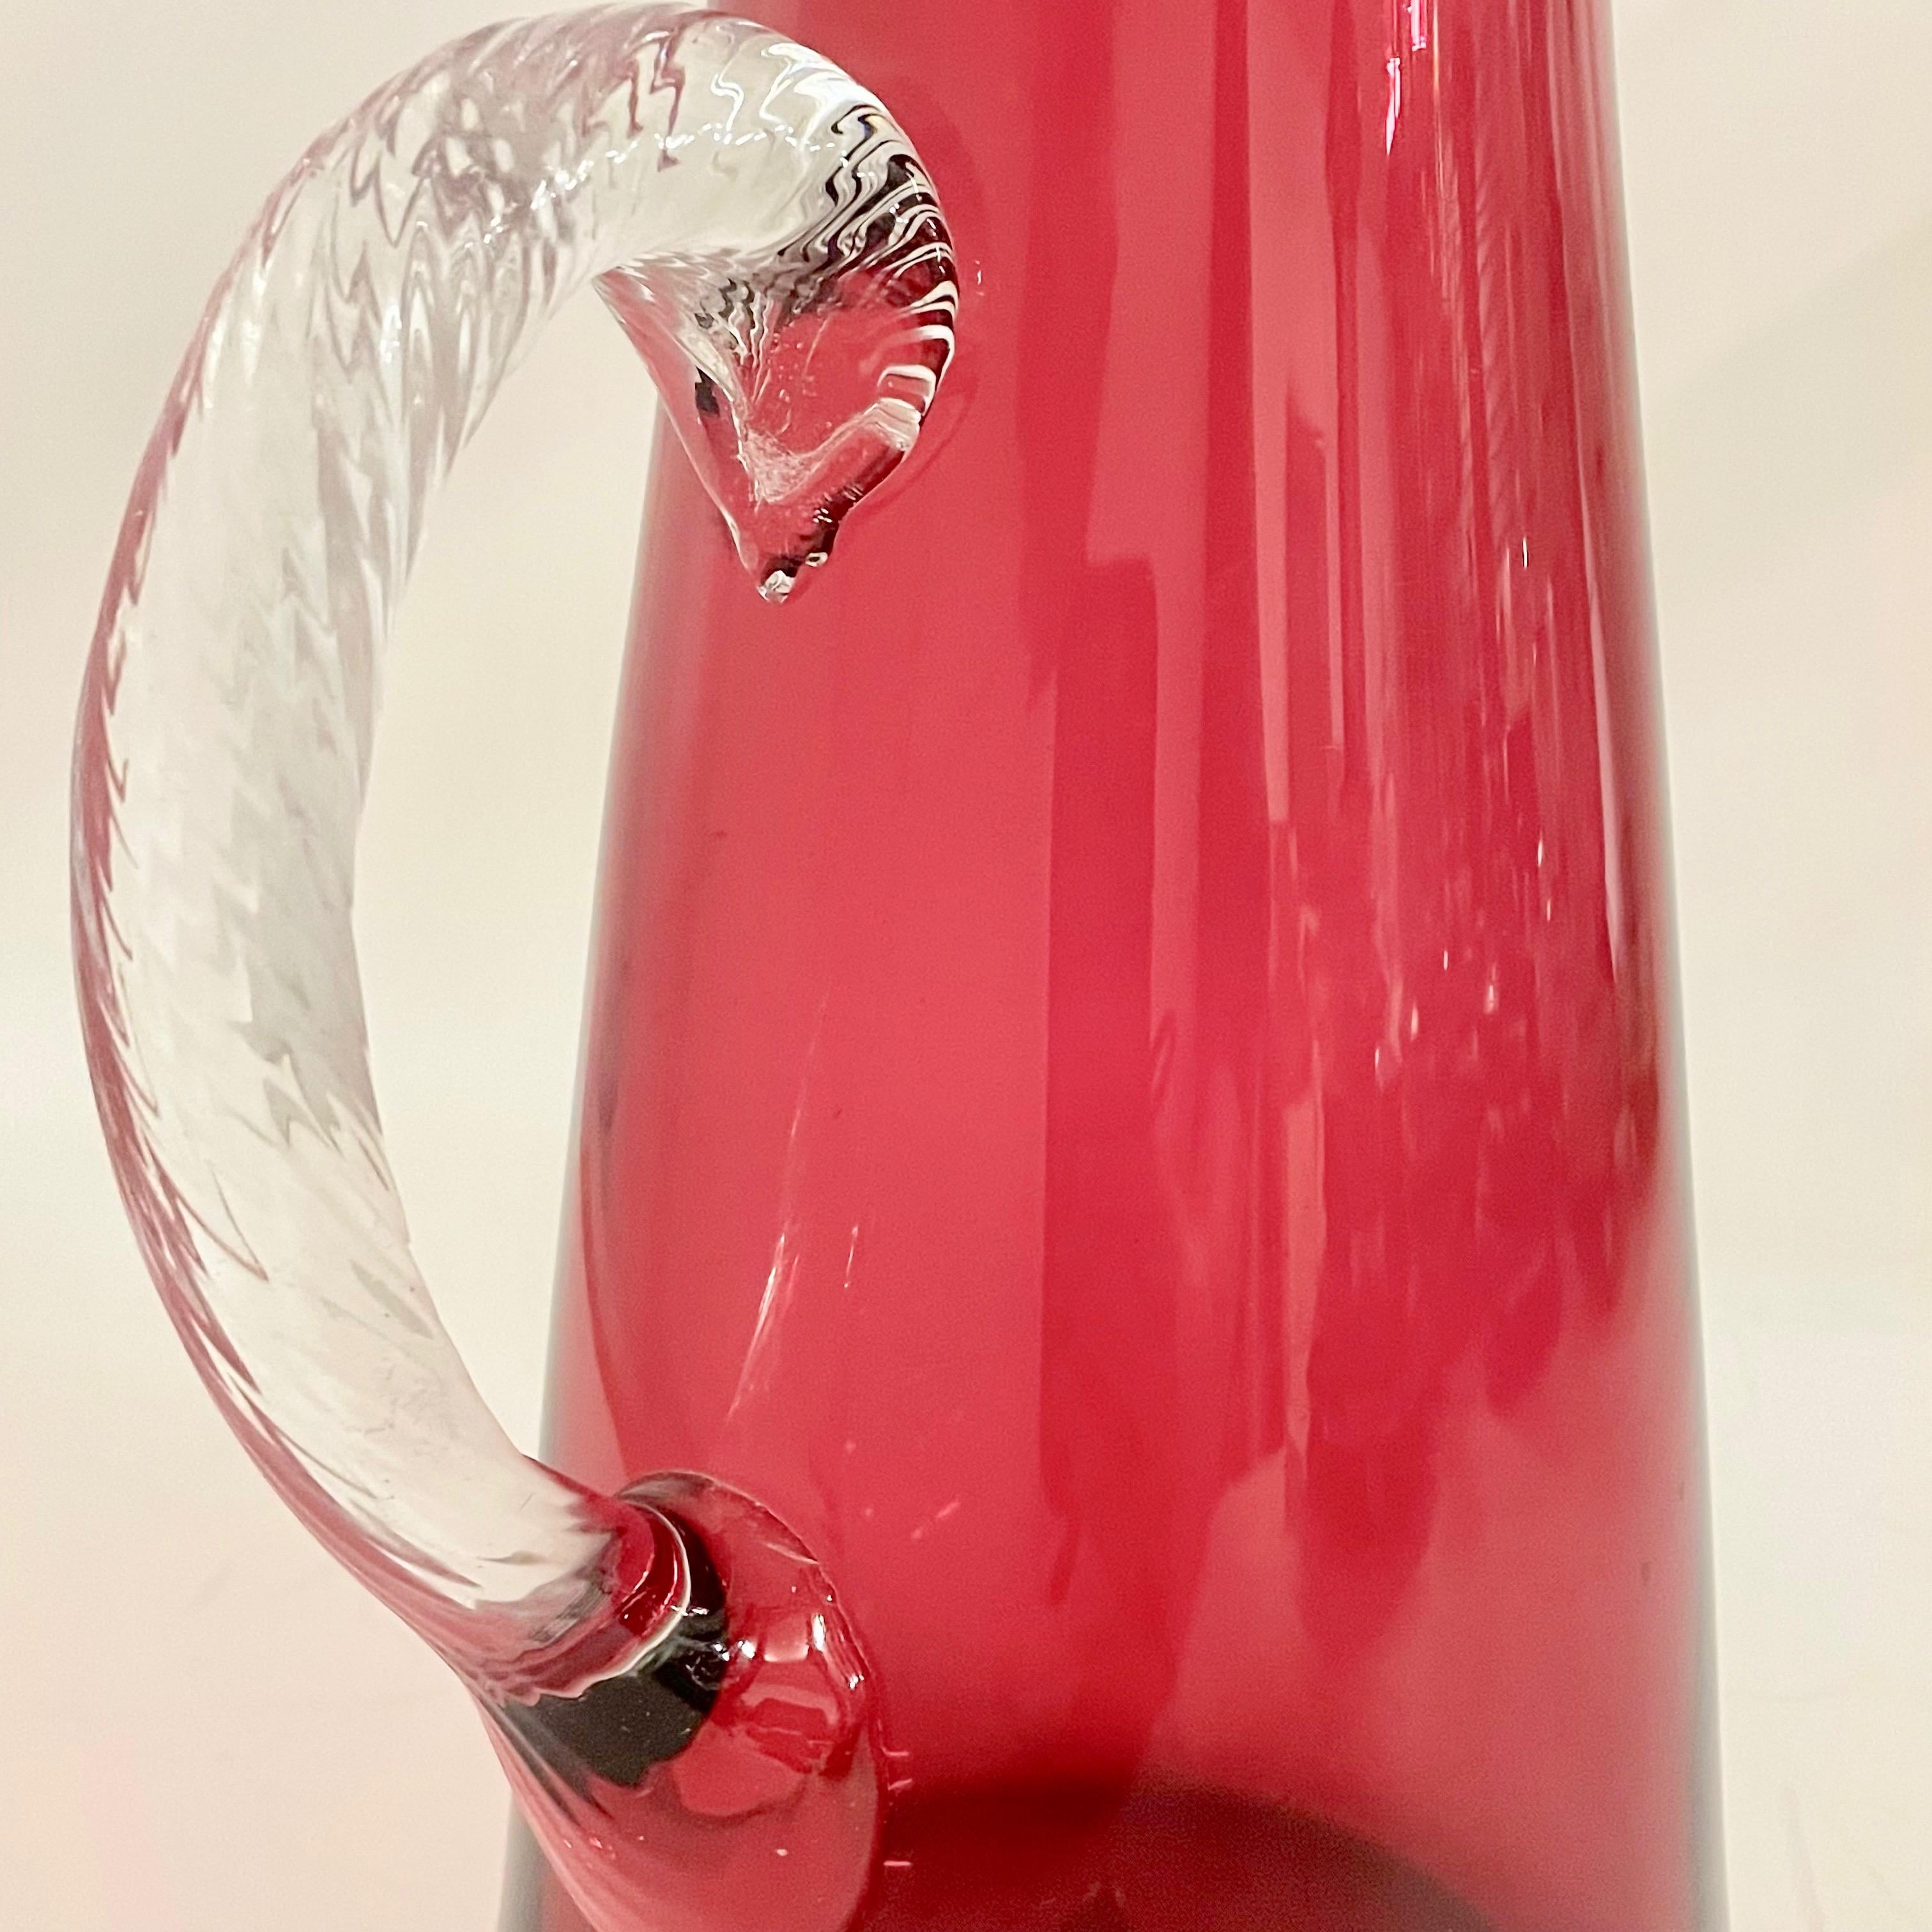 Cranberry Glass Jug by Heath & Middleton, 1907 For Sale 1